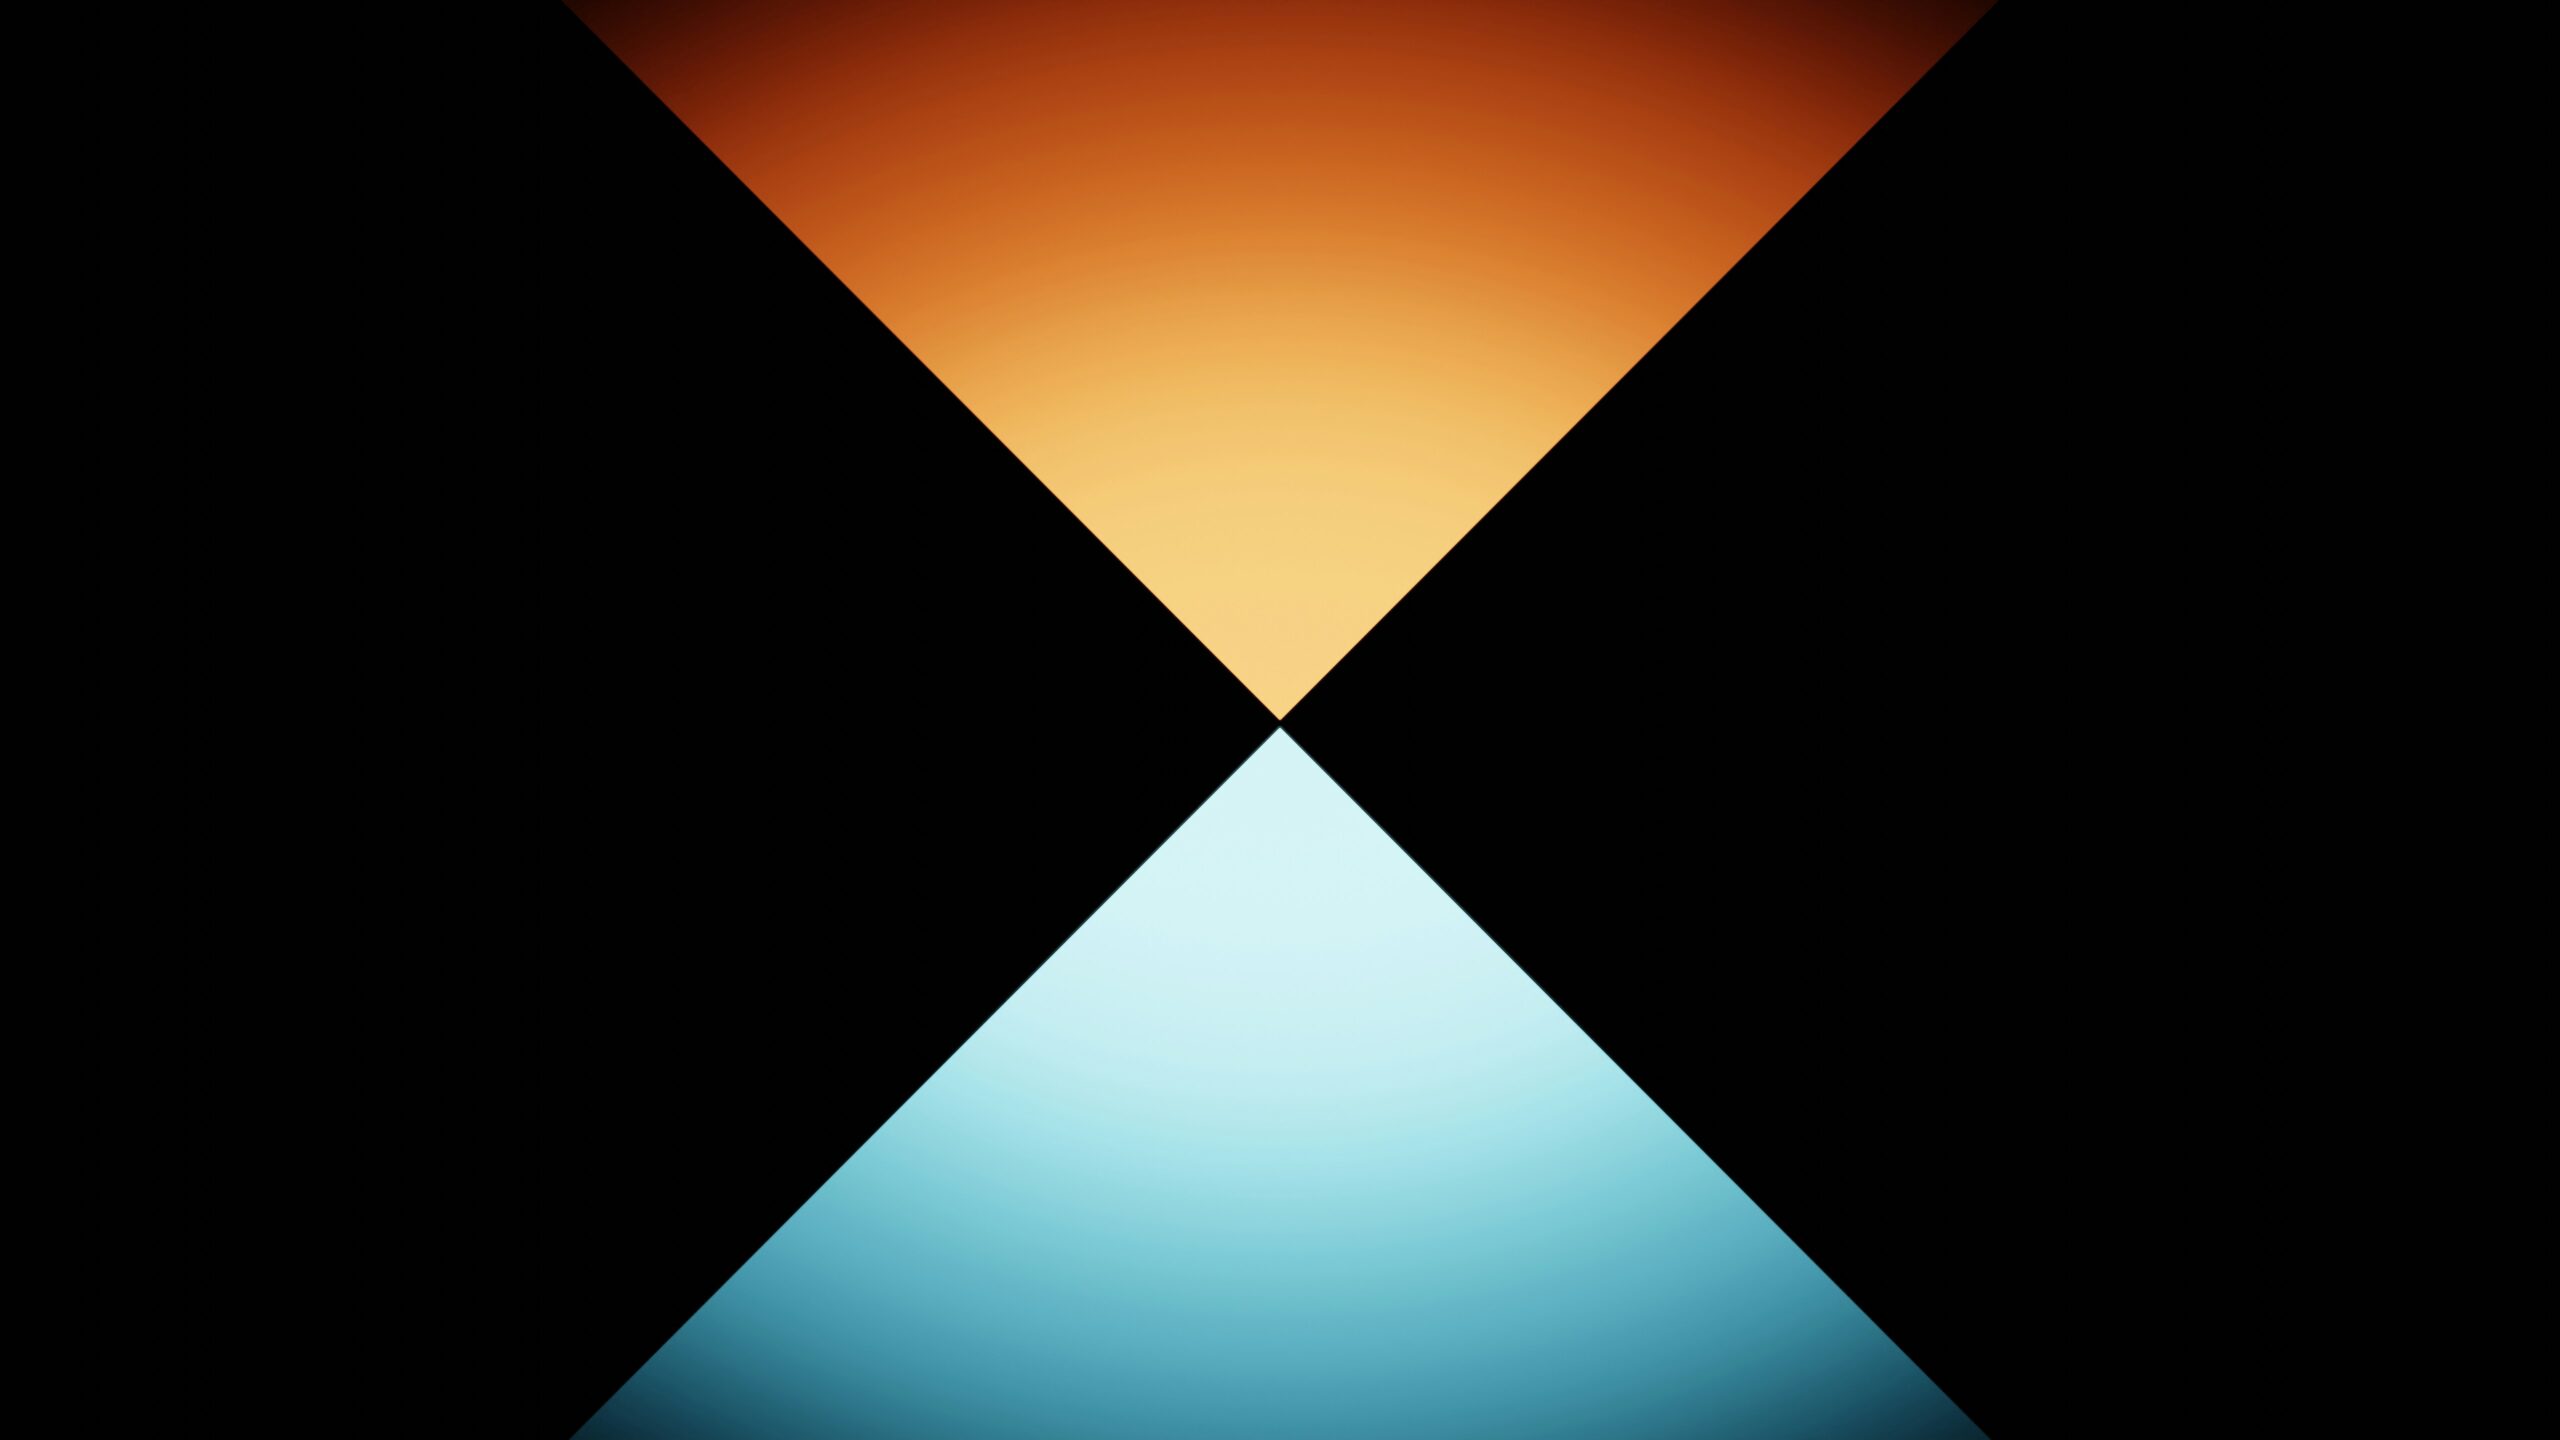 Two triangles touching points are seen in orange and yellow for an artistic design